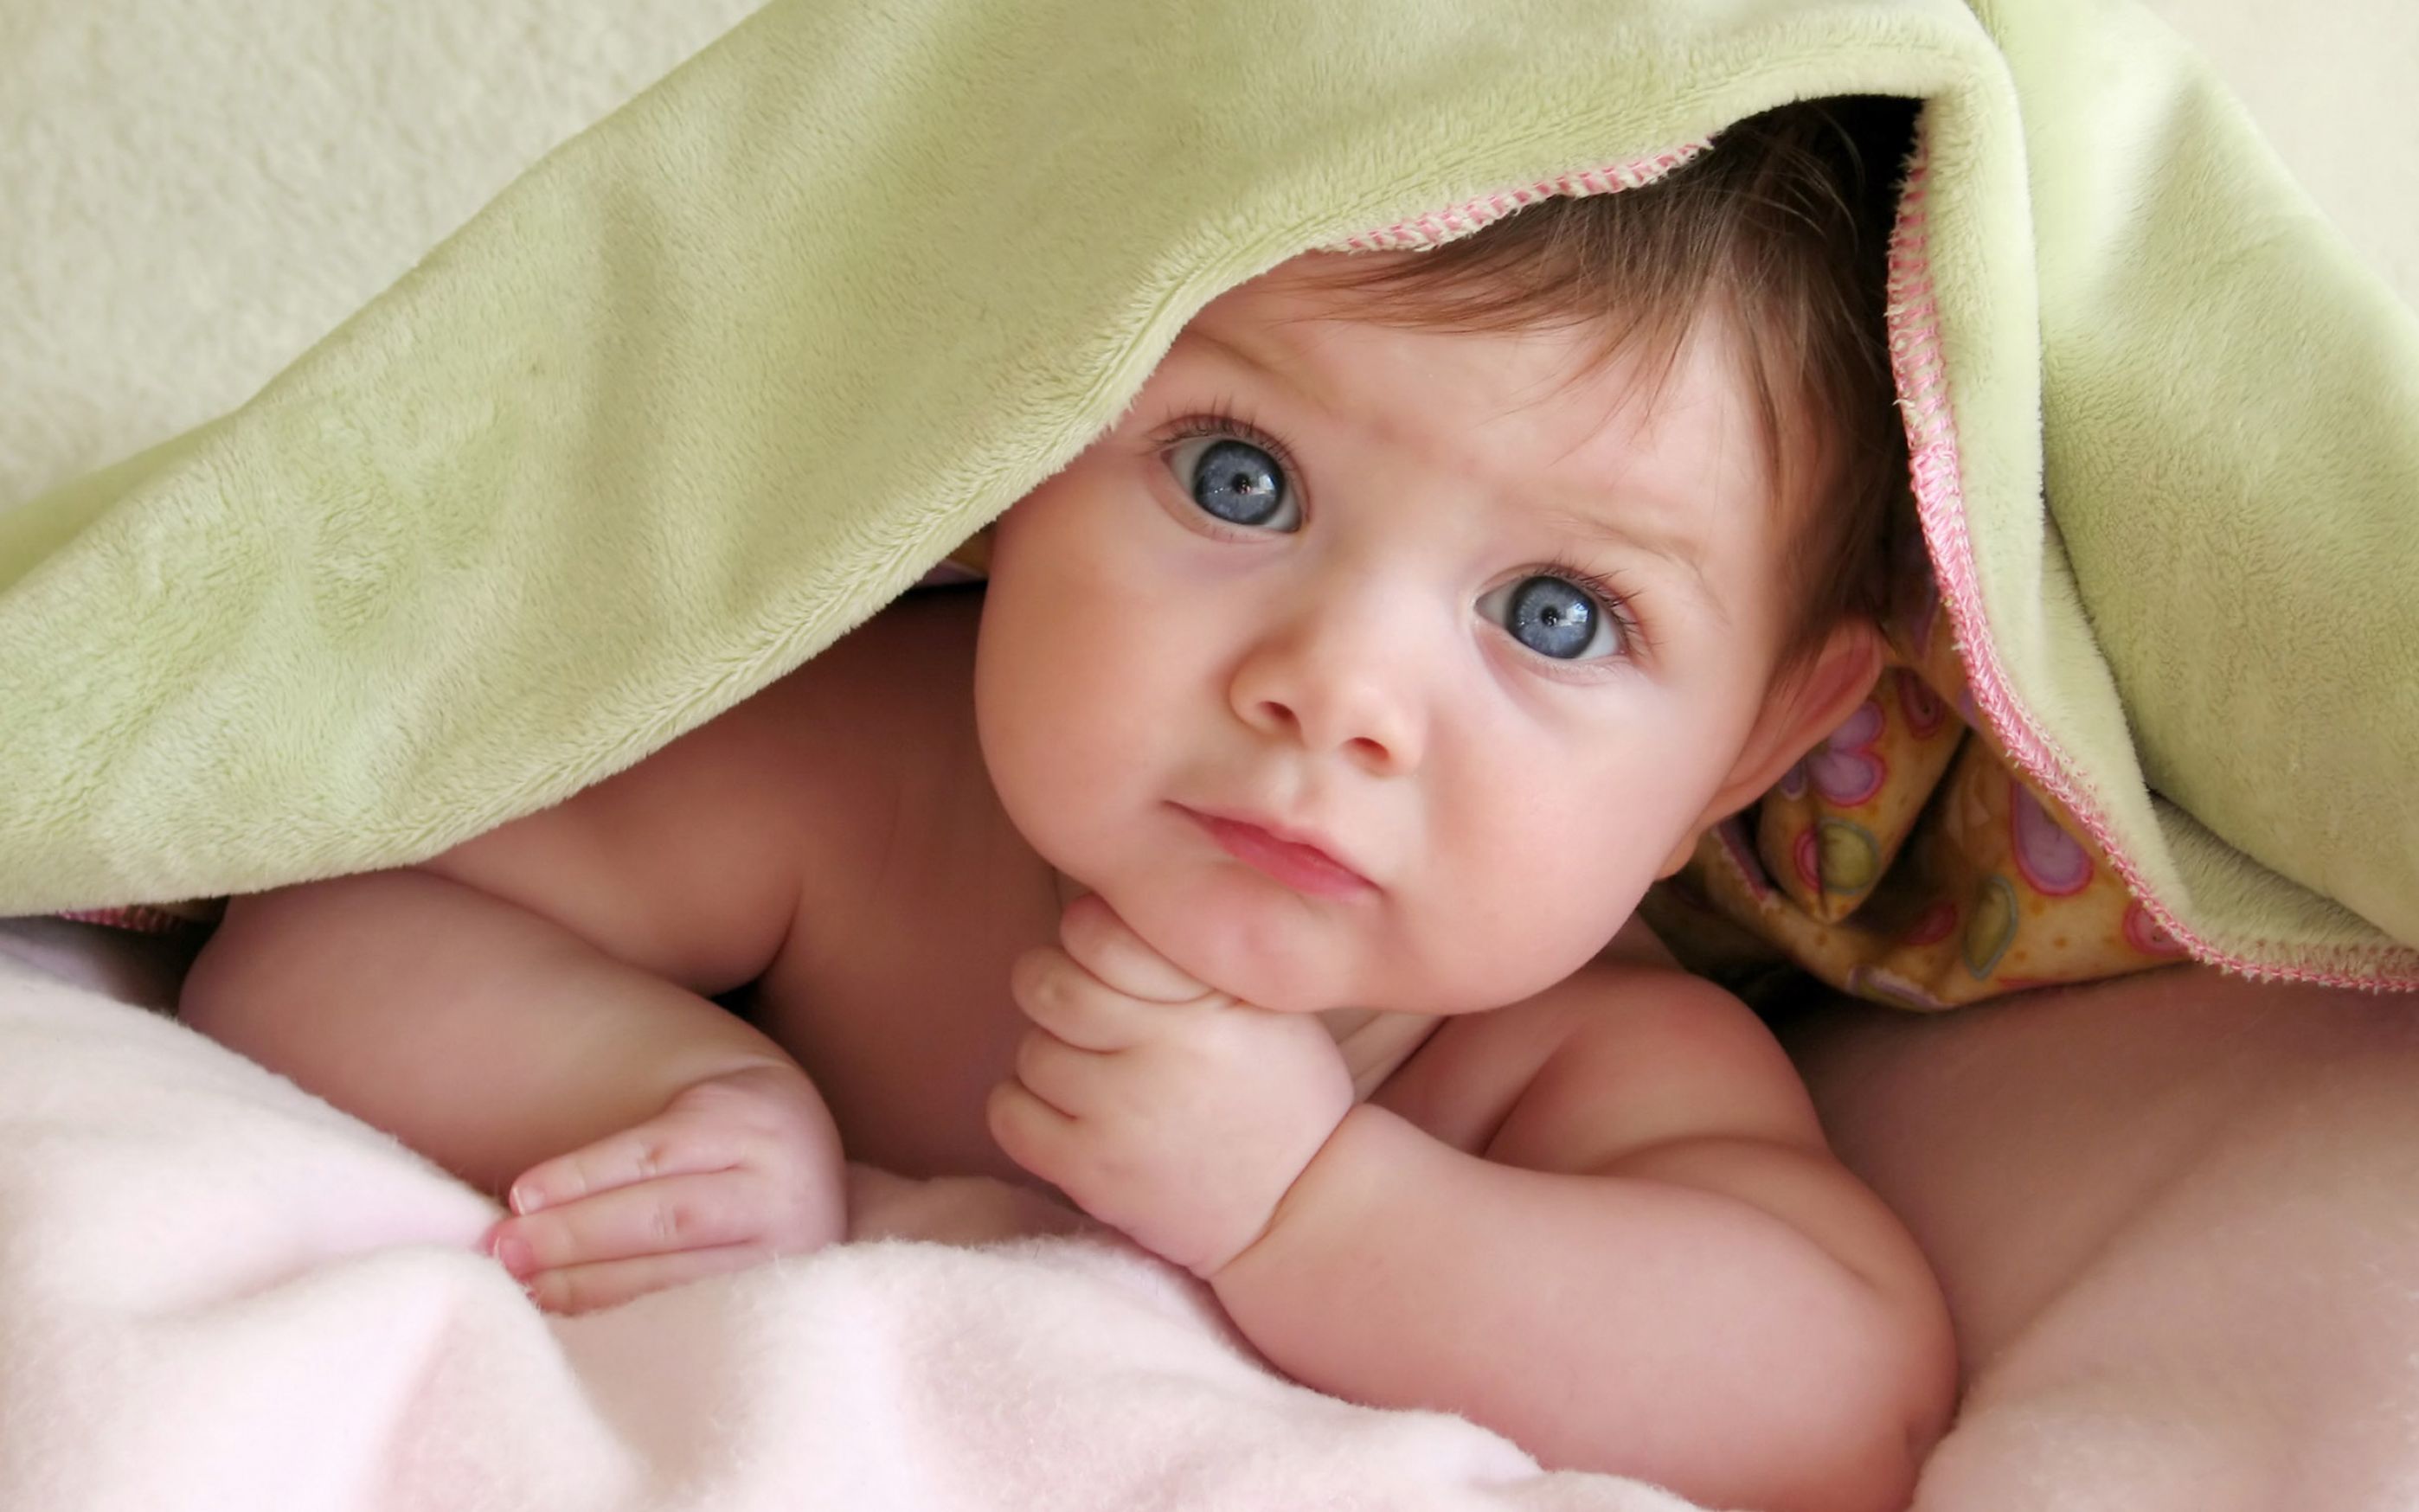 Very Cute Babies Wallpaper Pictures